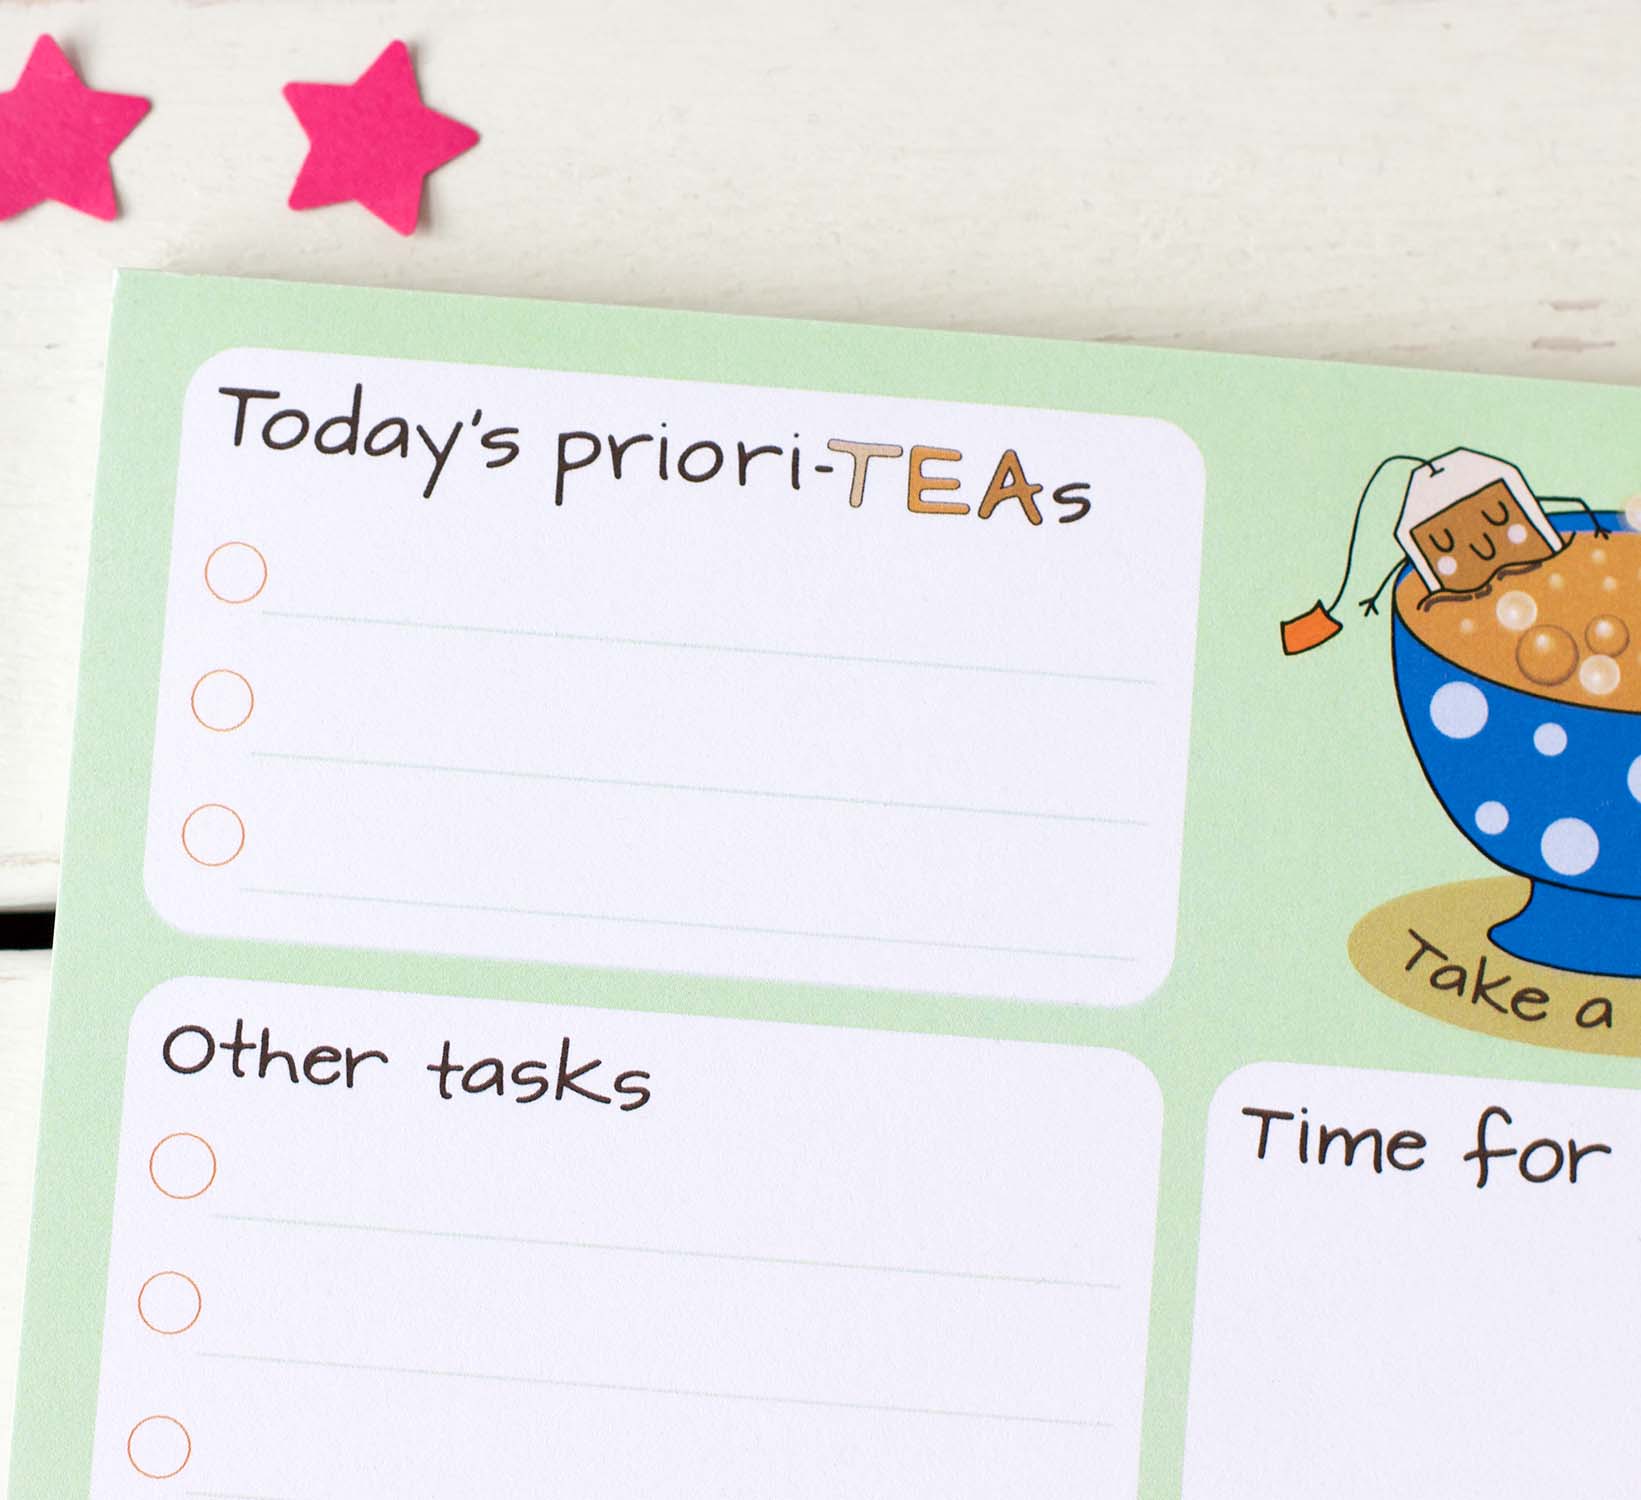 Section for Today's priori-teas (priorities) and another for Other Tasks